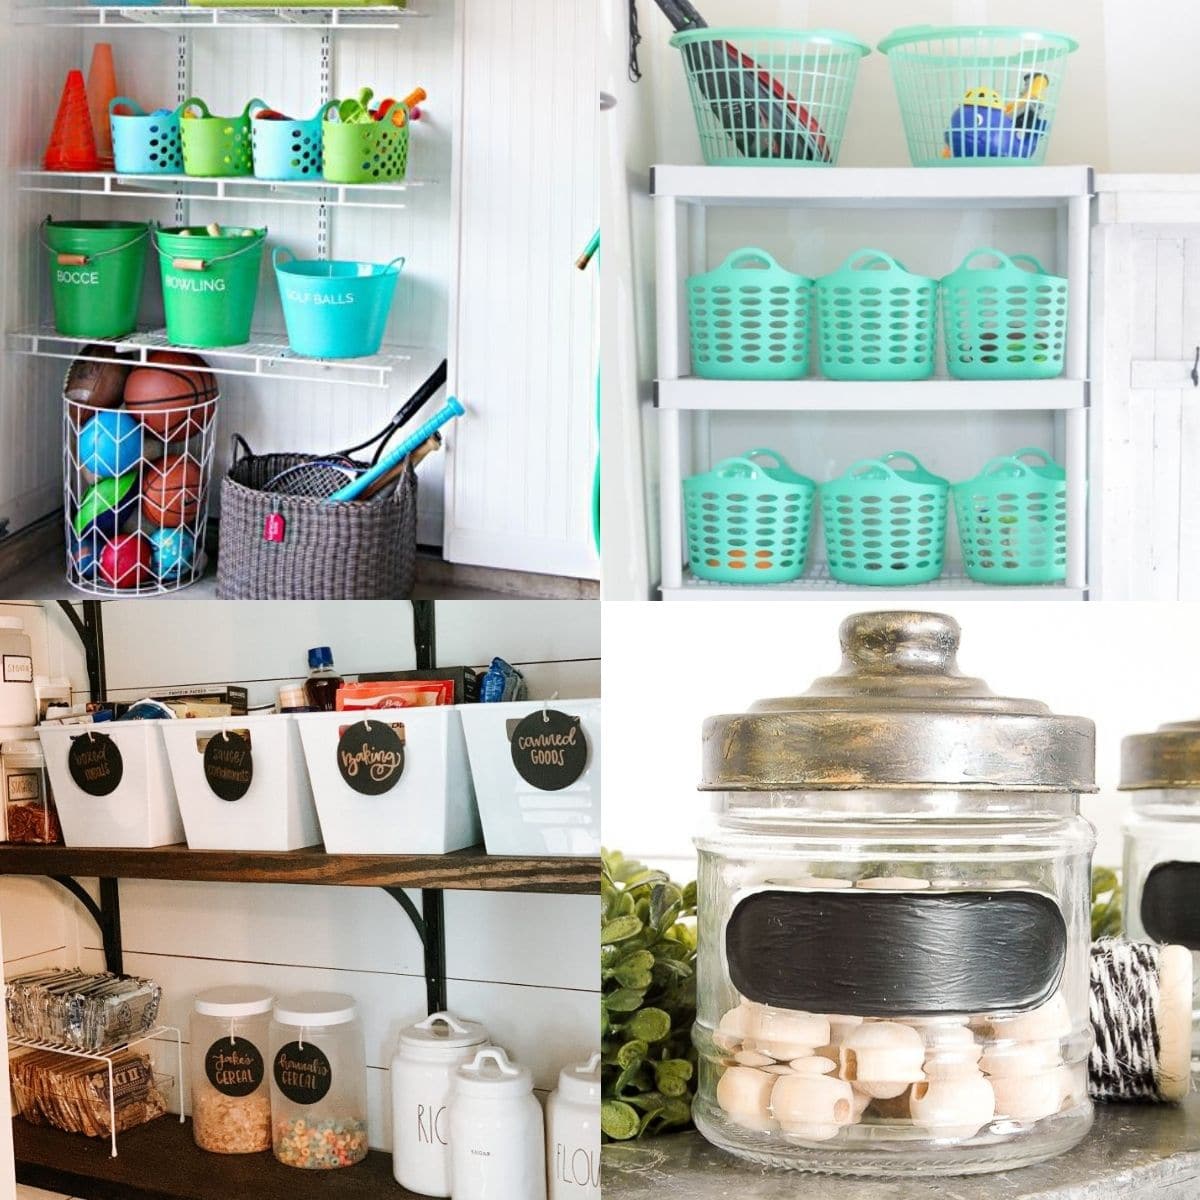 Increase storage with these Dollar Tree storage hacks.

These simple organizing tips are fun, budget-friendly, and look extra cute. 😉

#Storage #StorageIdeas #DollarTree #DollarTreeStorageIdeas

 LocalInfoForYou.com/372632/dollar-…